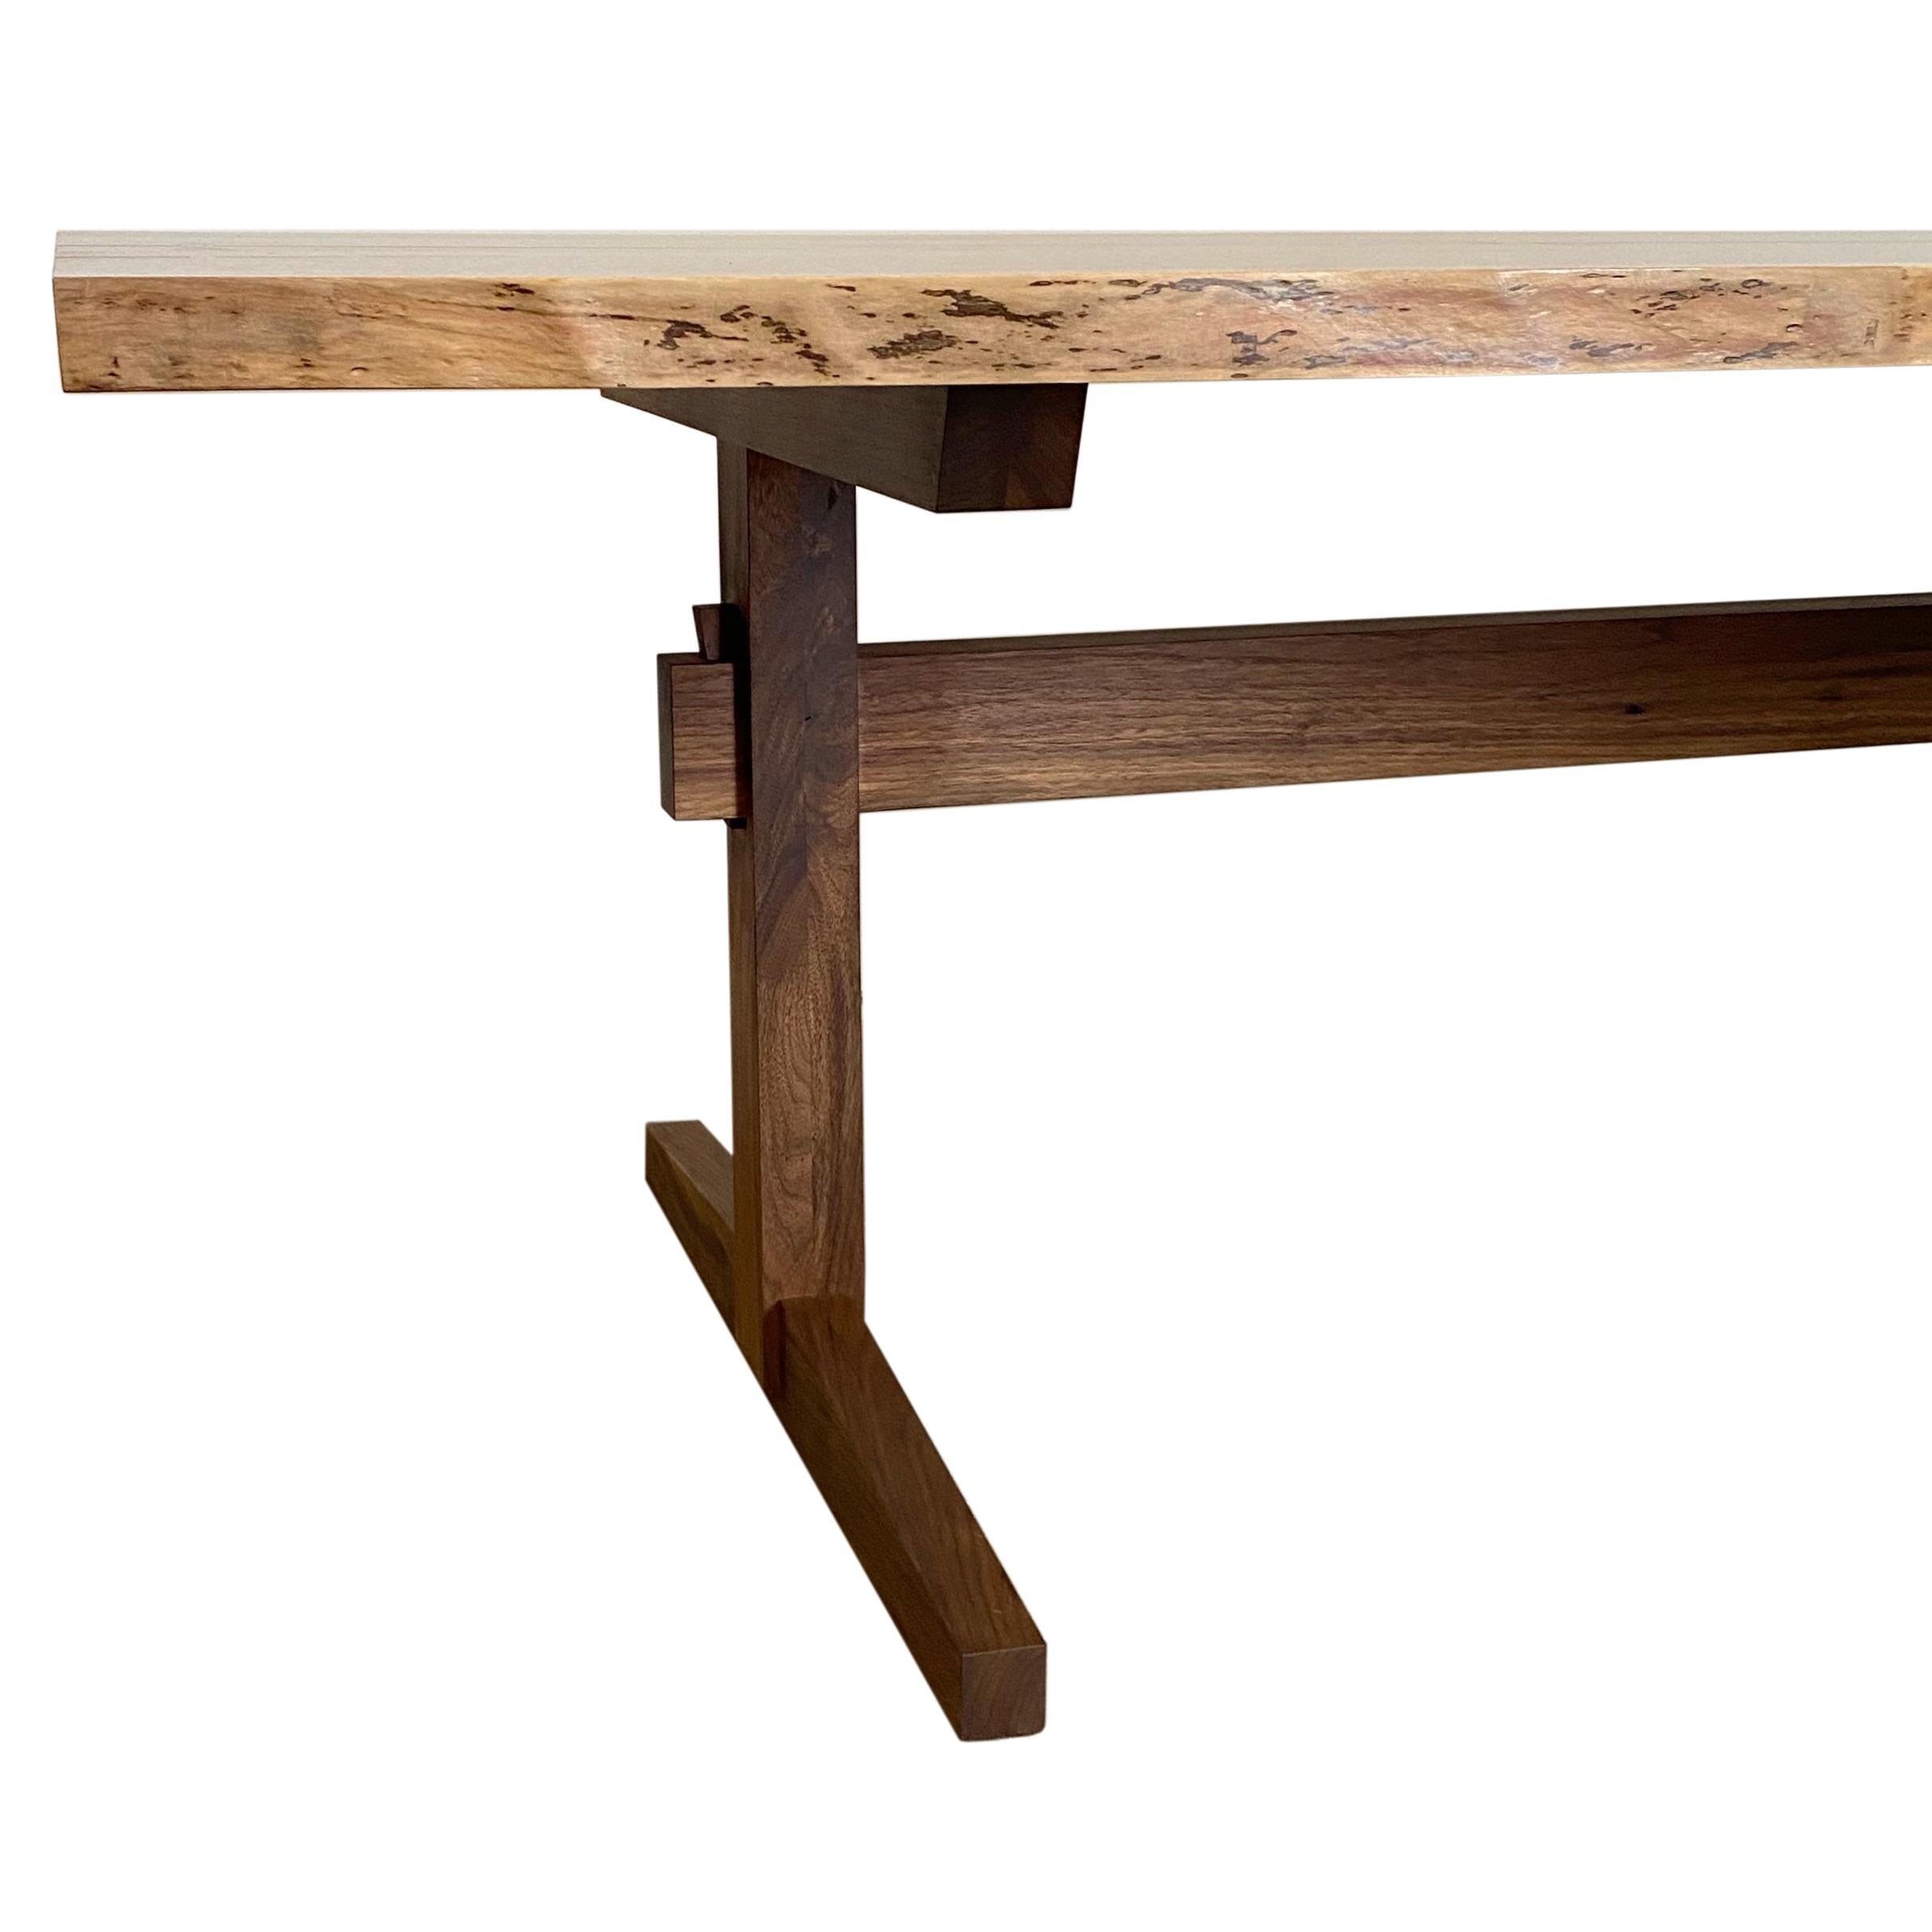 New York Heartwood's Sen Trestle table is inspired by Mid-Century Design, adding clean lines to a George Nakashima influenced base and butterflied split live-edge slab top. Constructed by hand using traditional joinery techniques including wedged